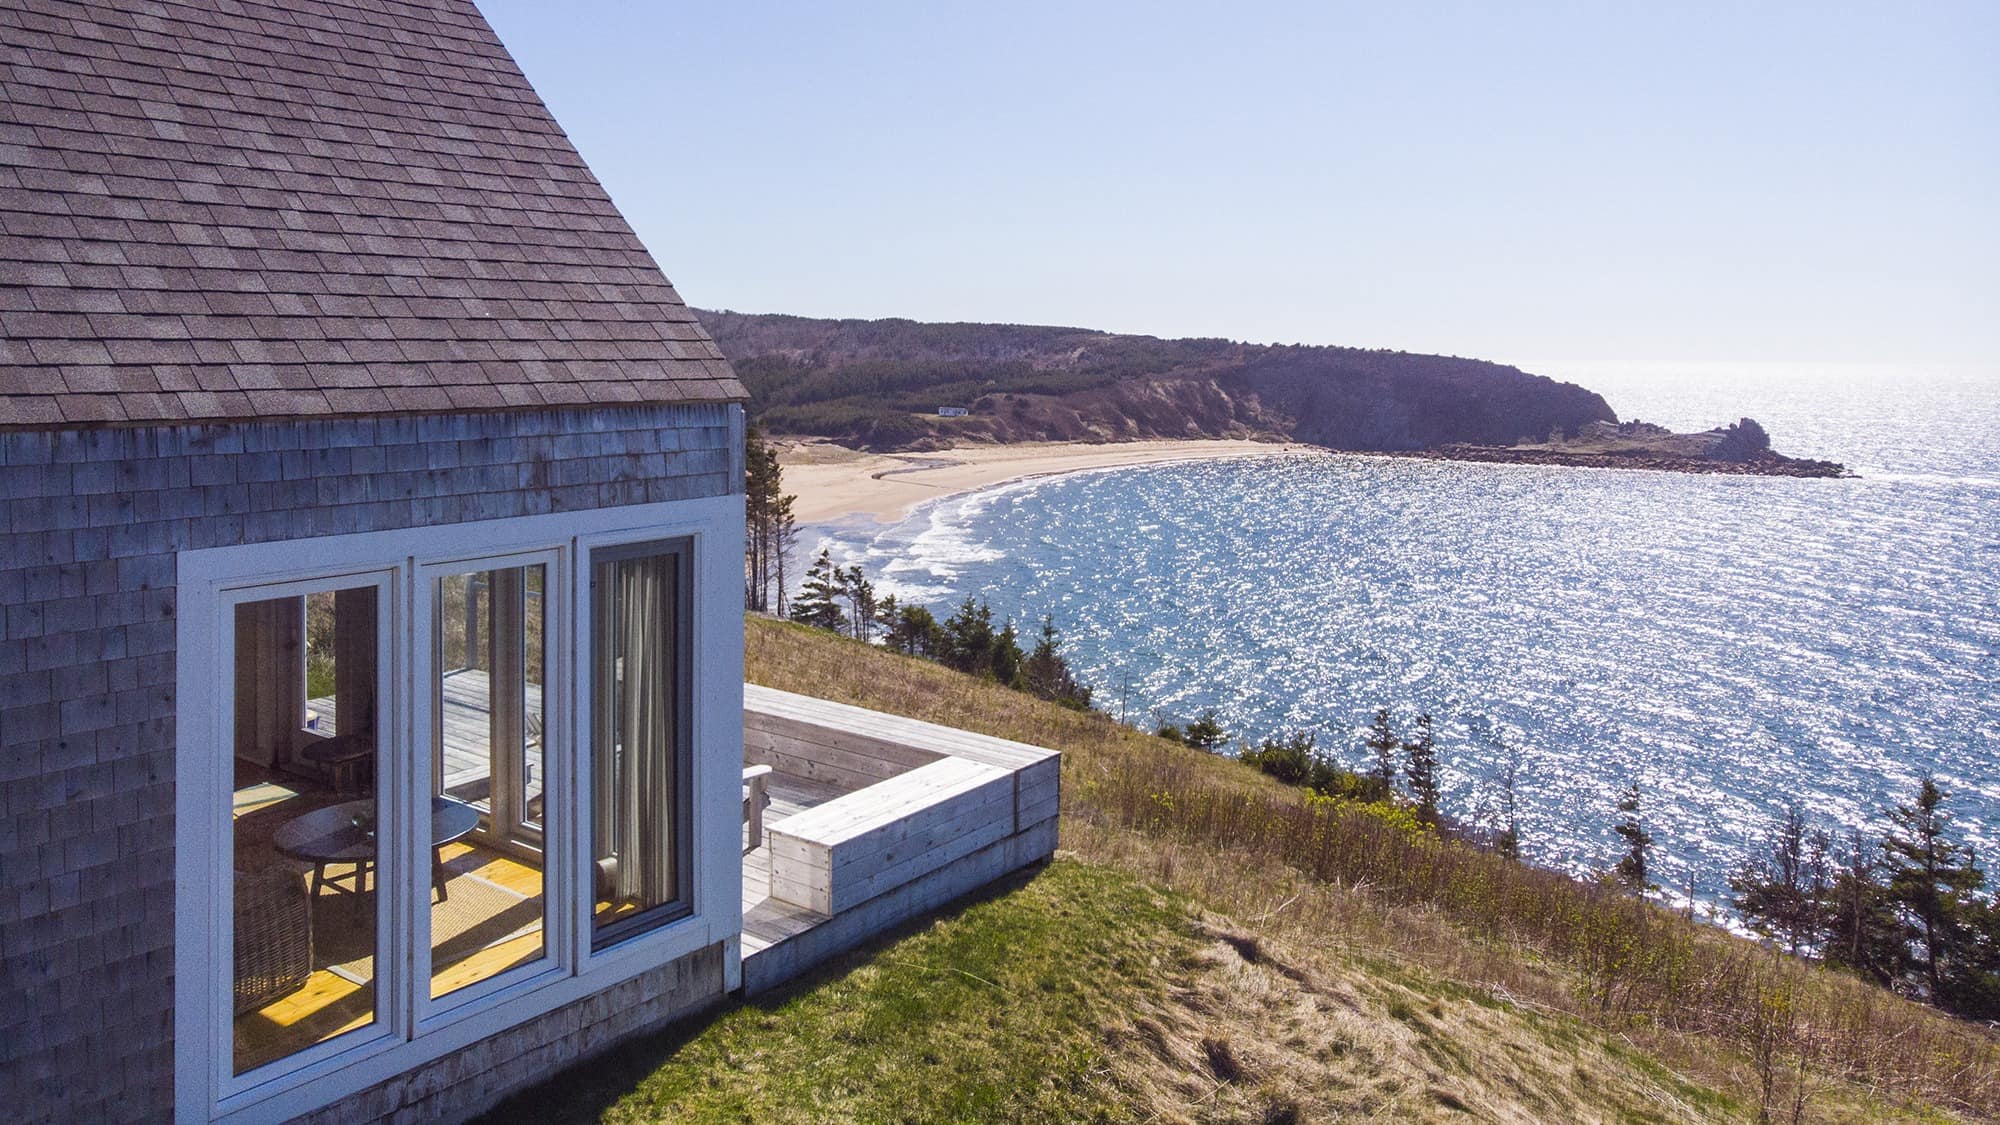 Explore the wilderness with cottage rentals in Nova Scotia